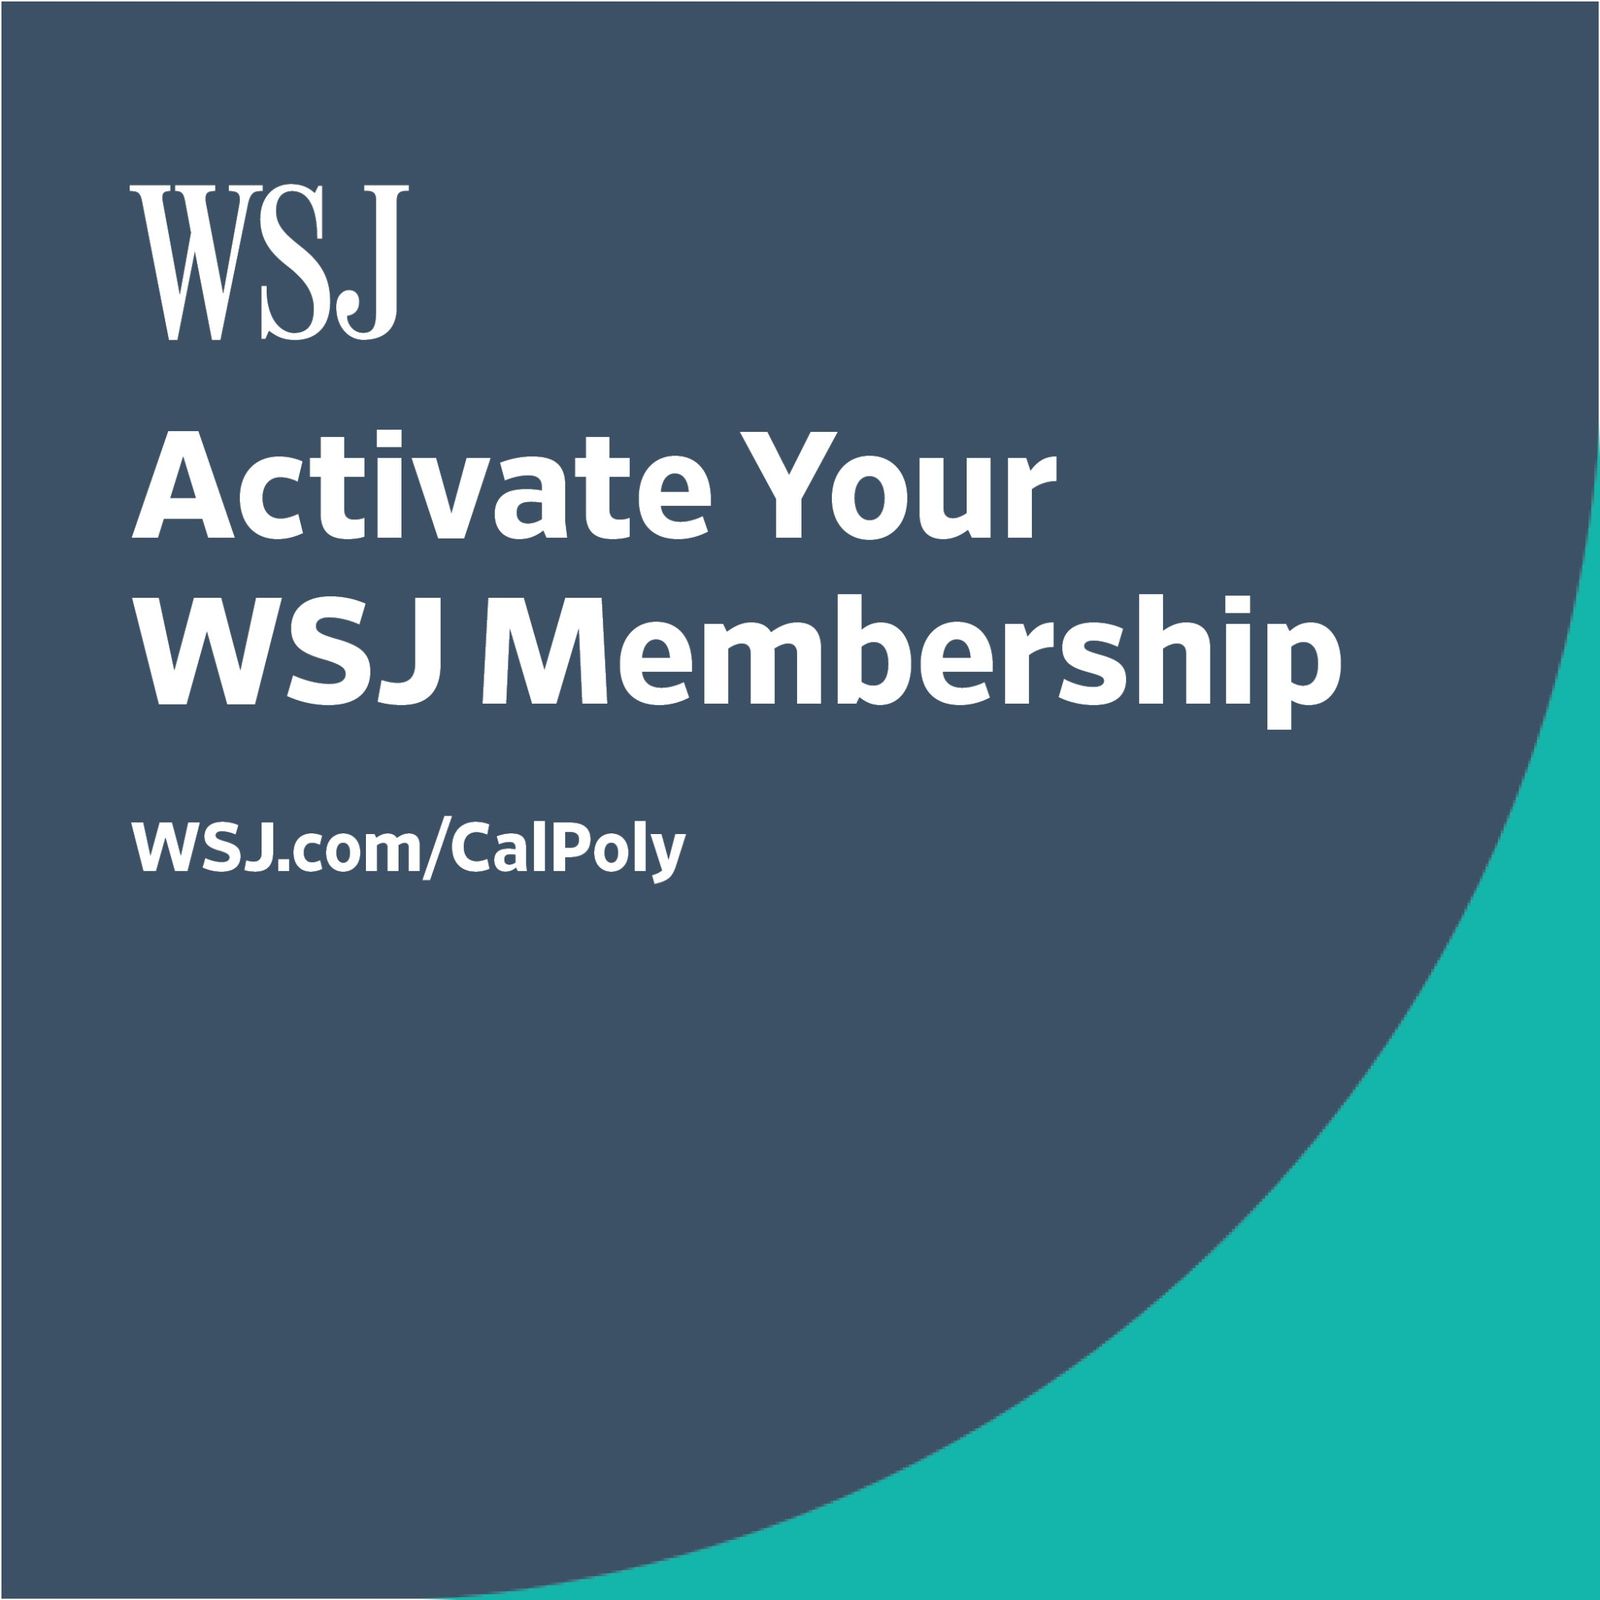 Campus Community Can Access WJS